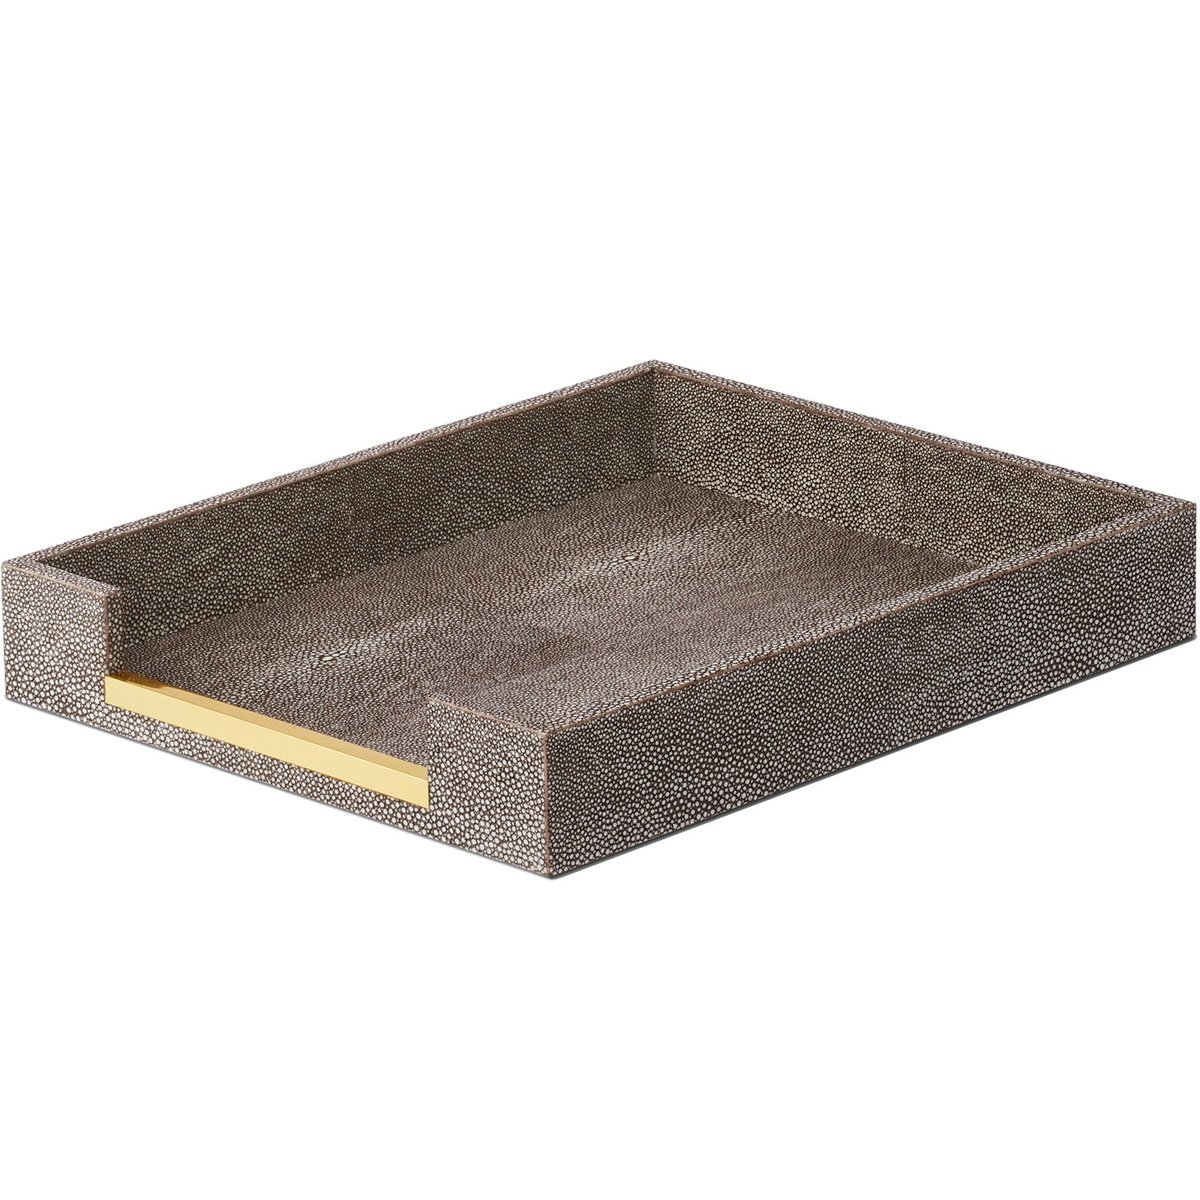 Chocolate Shagreen Paper Tray